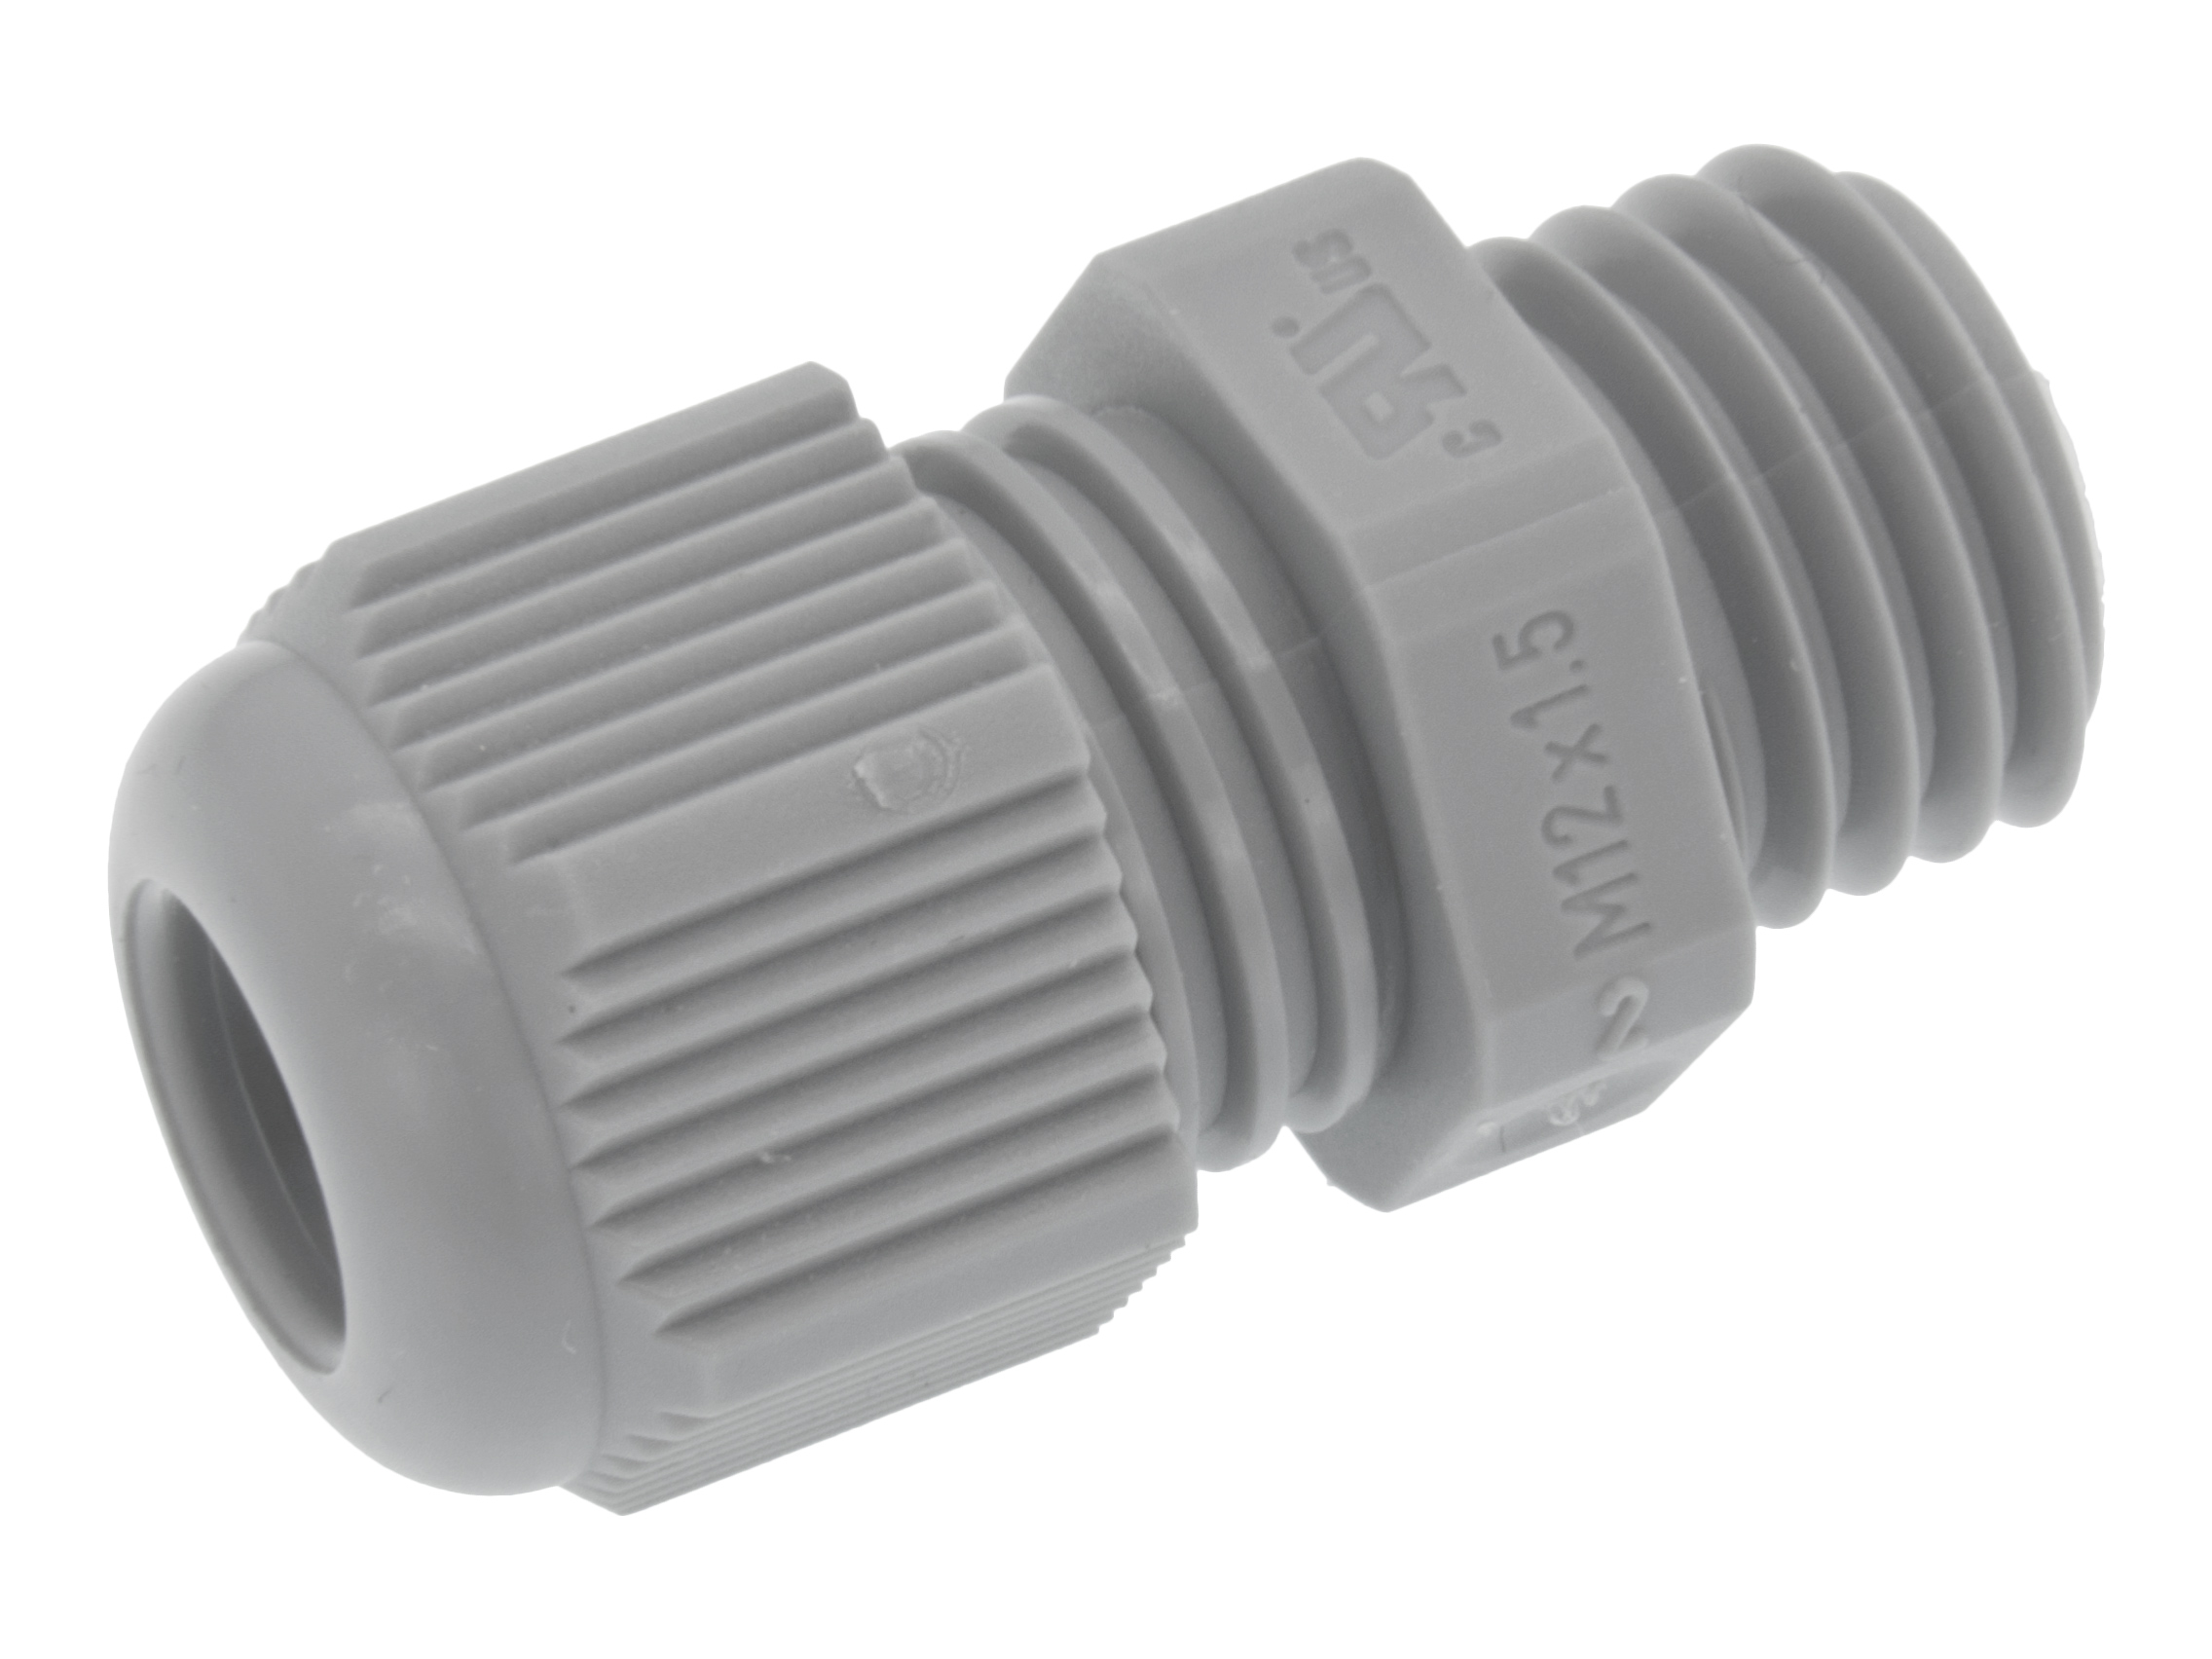 Cable gland M12 x 1.5 ø5mm @ electrokit